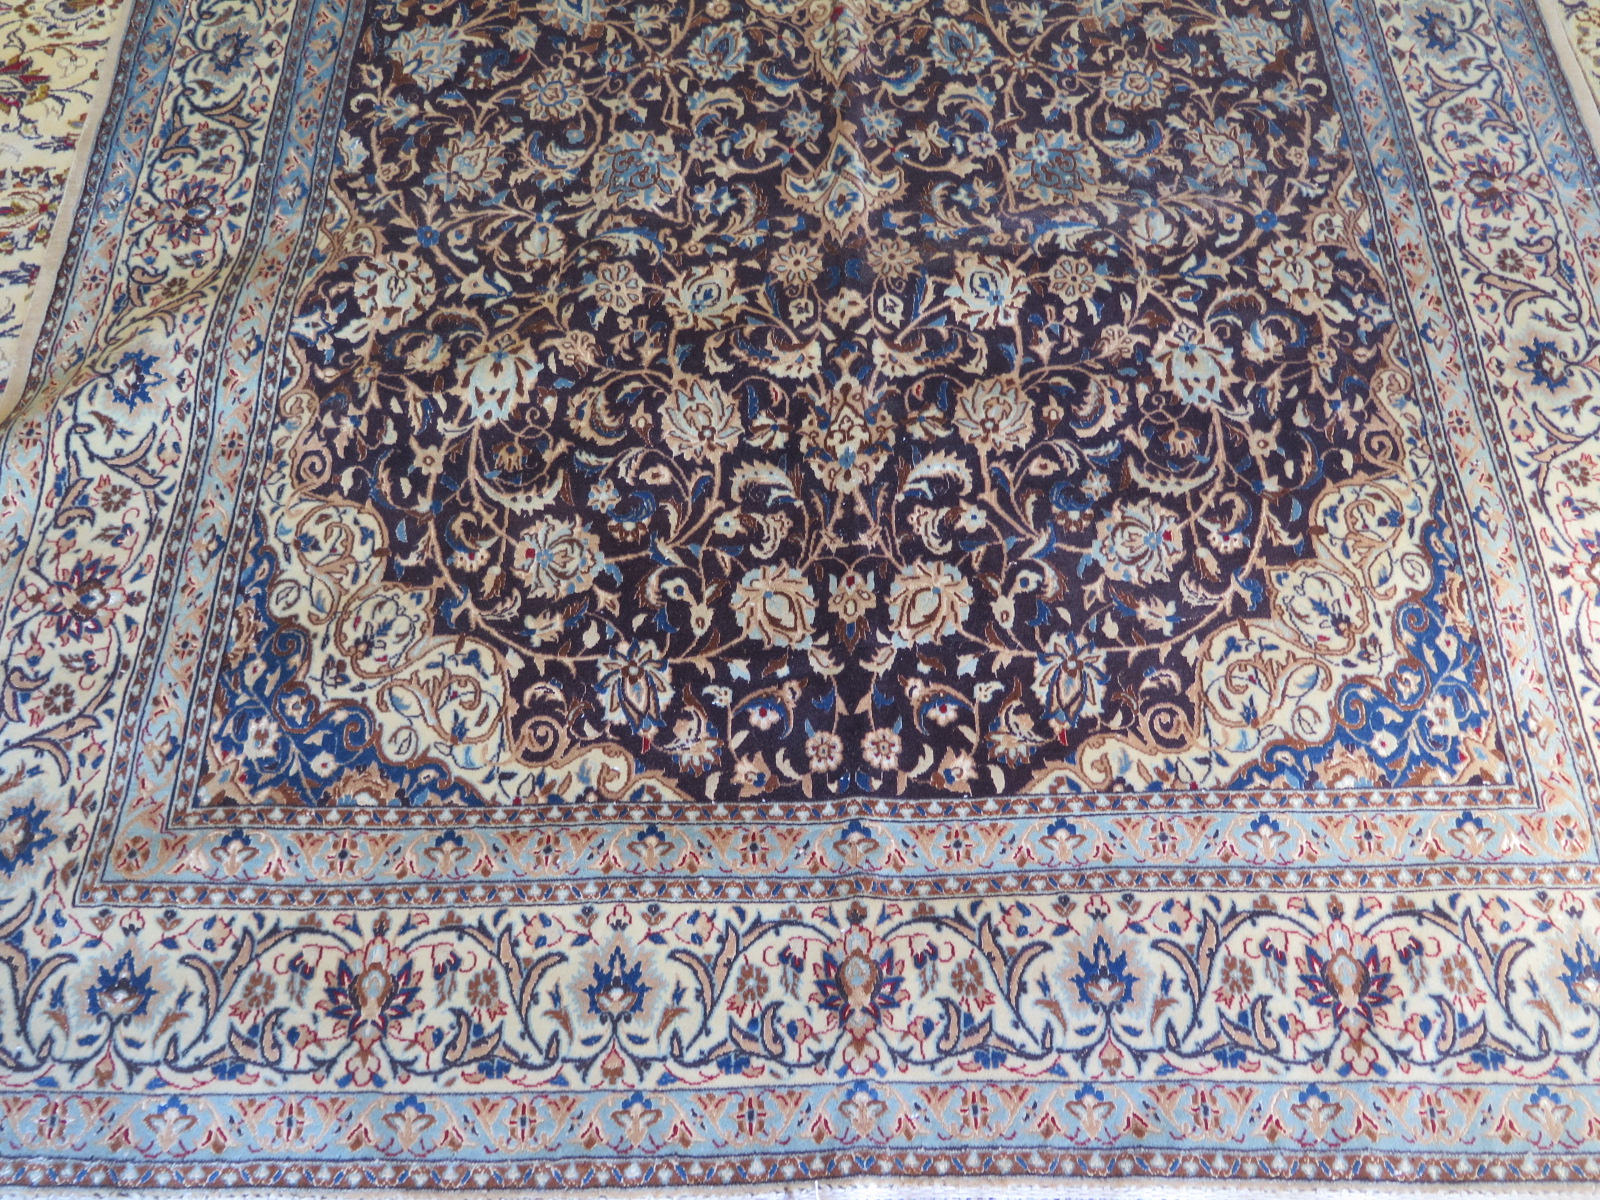 A hand knotted woollen Fiane Nain, 500 knots per square inch , silk inlaid rug - 3.1m x 1.75m - Image 2 of 5